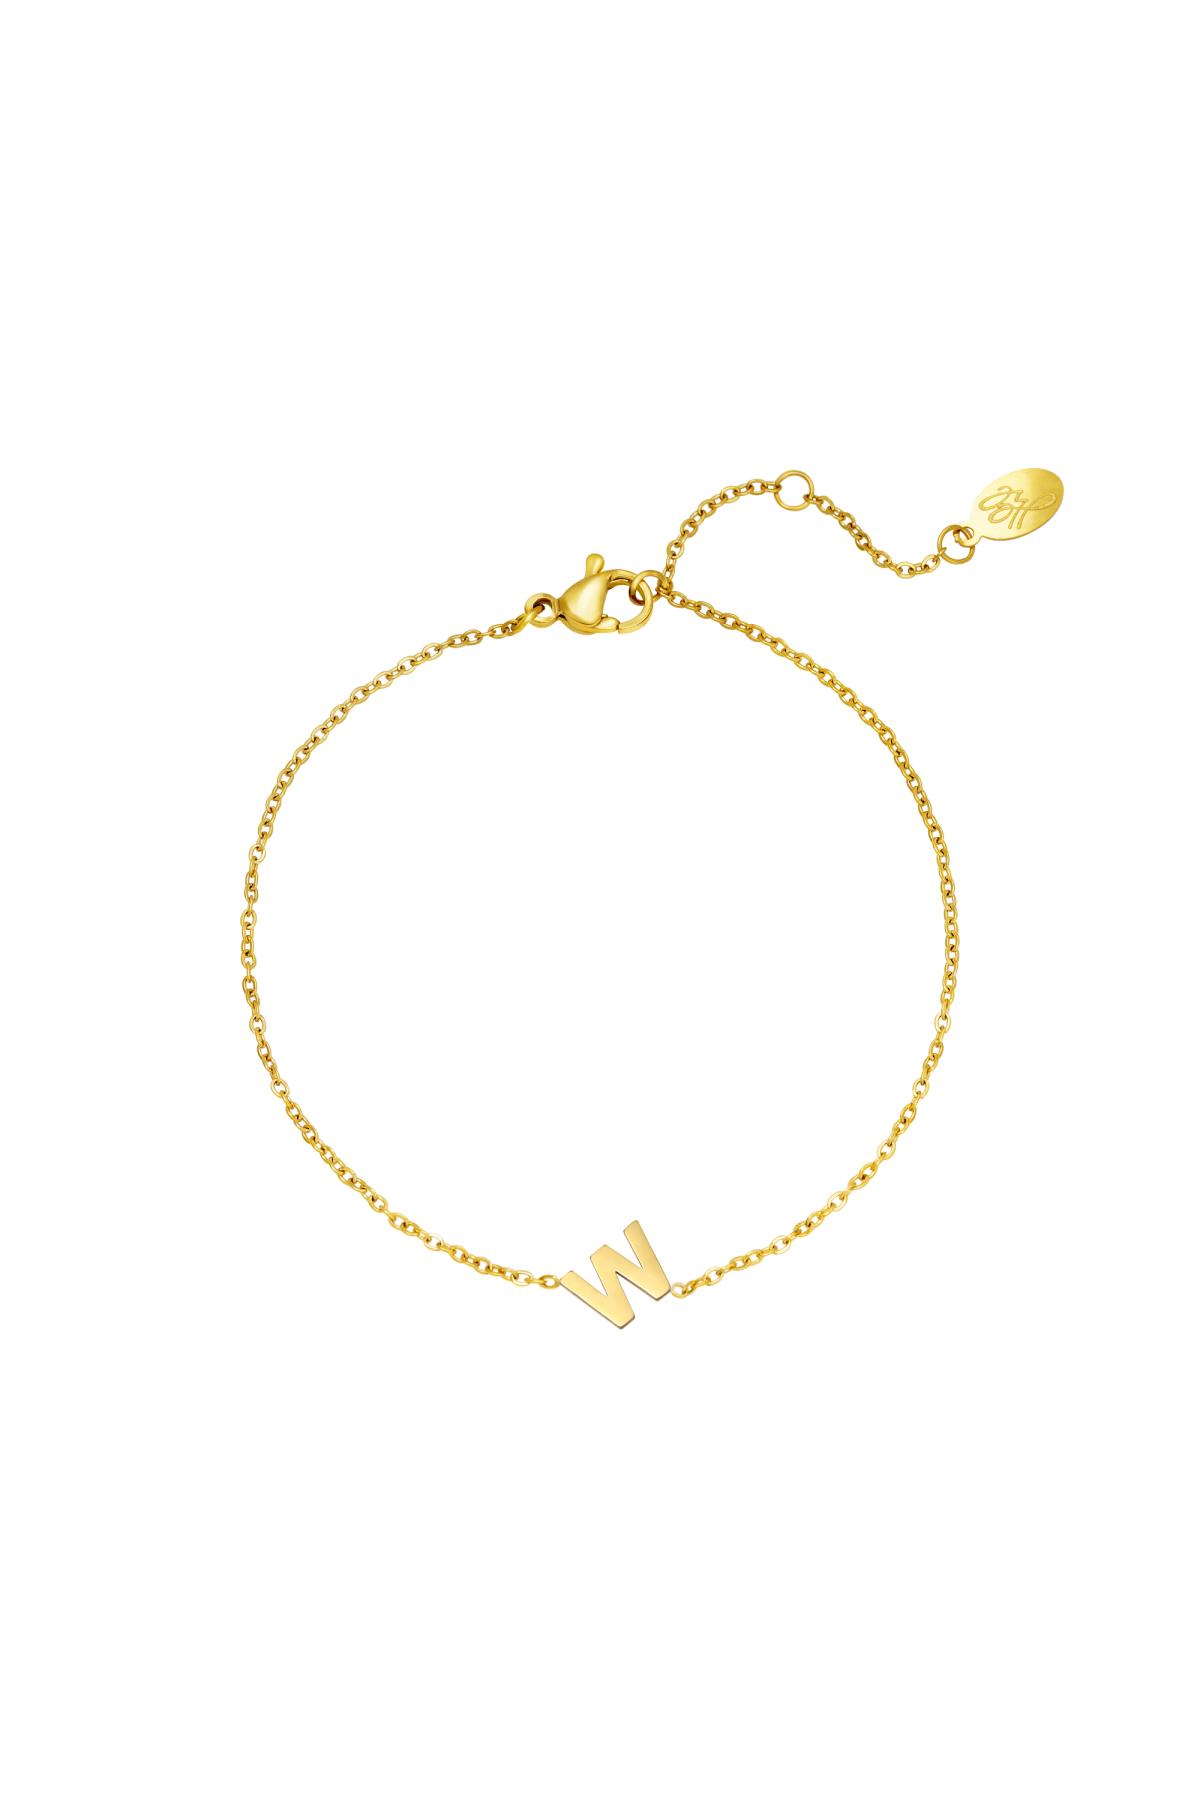 Gold / Stainless steel bracelet initial W Gold Picture12